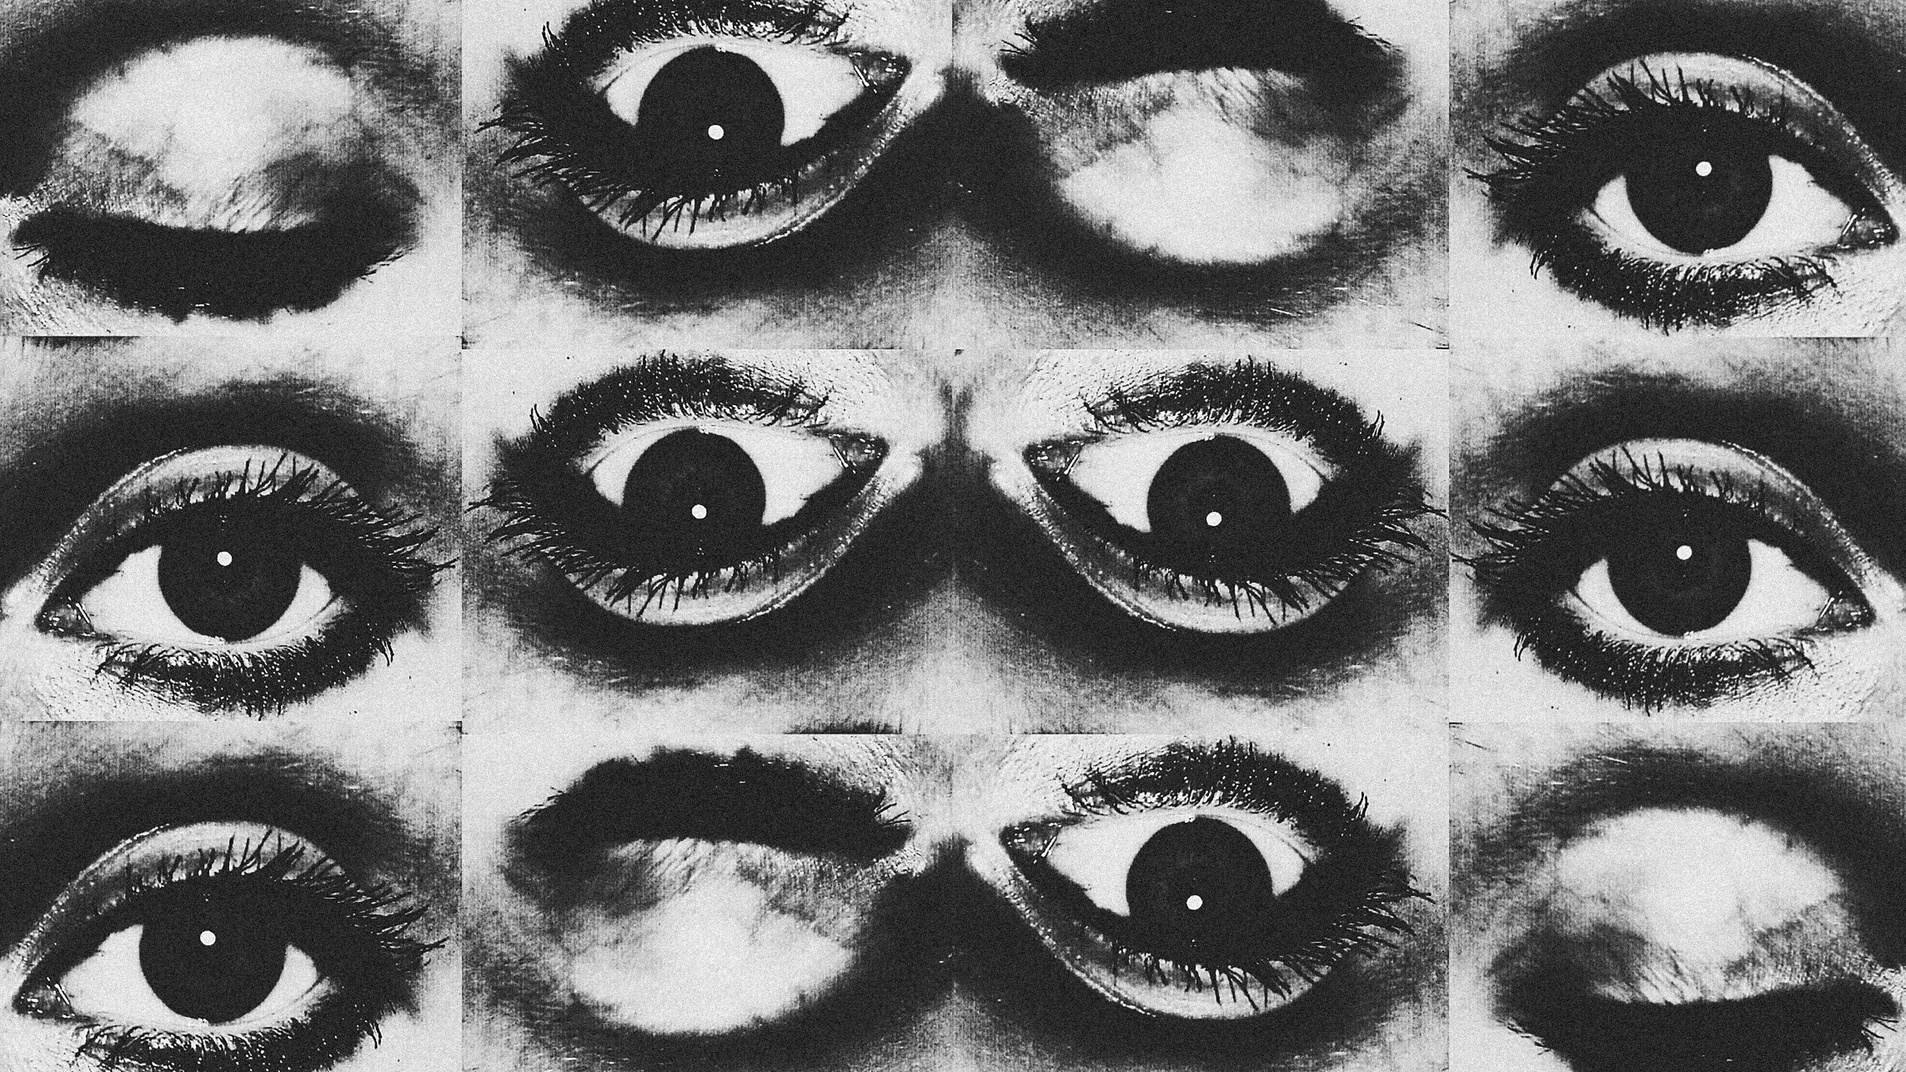 Black and White Collage of Eyes